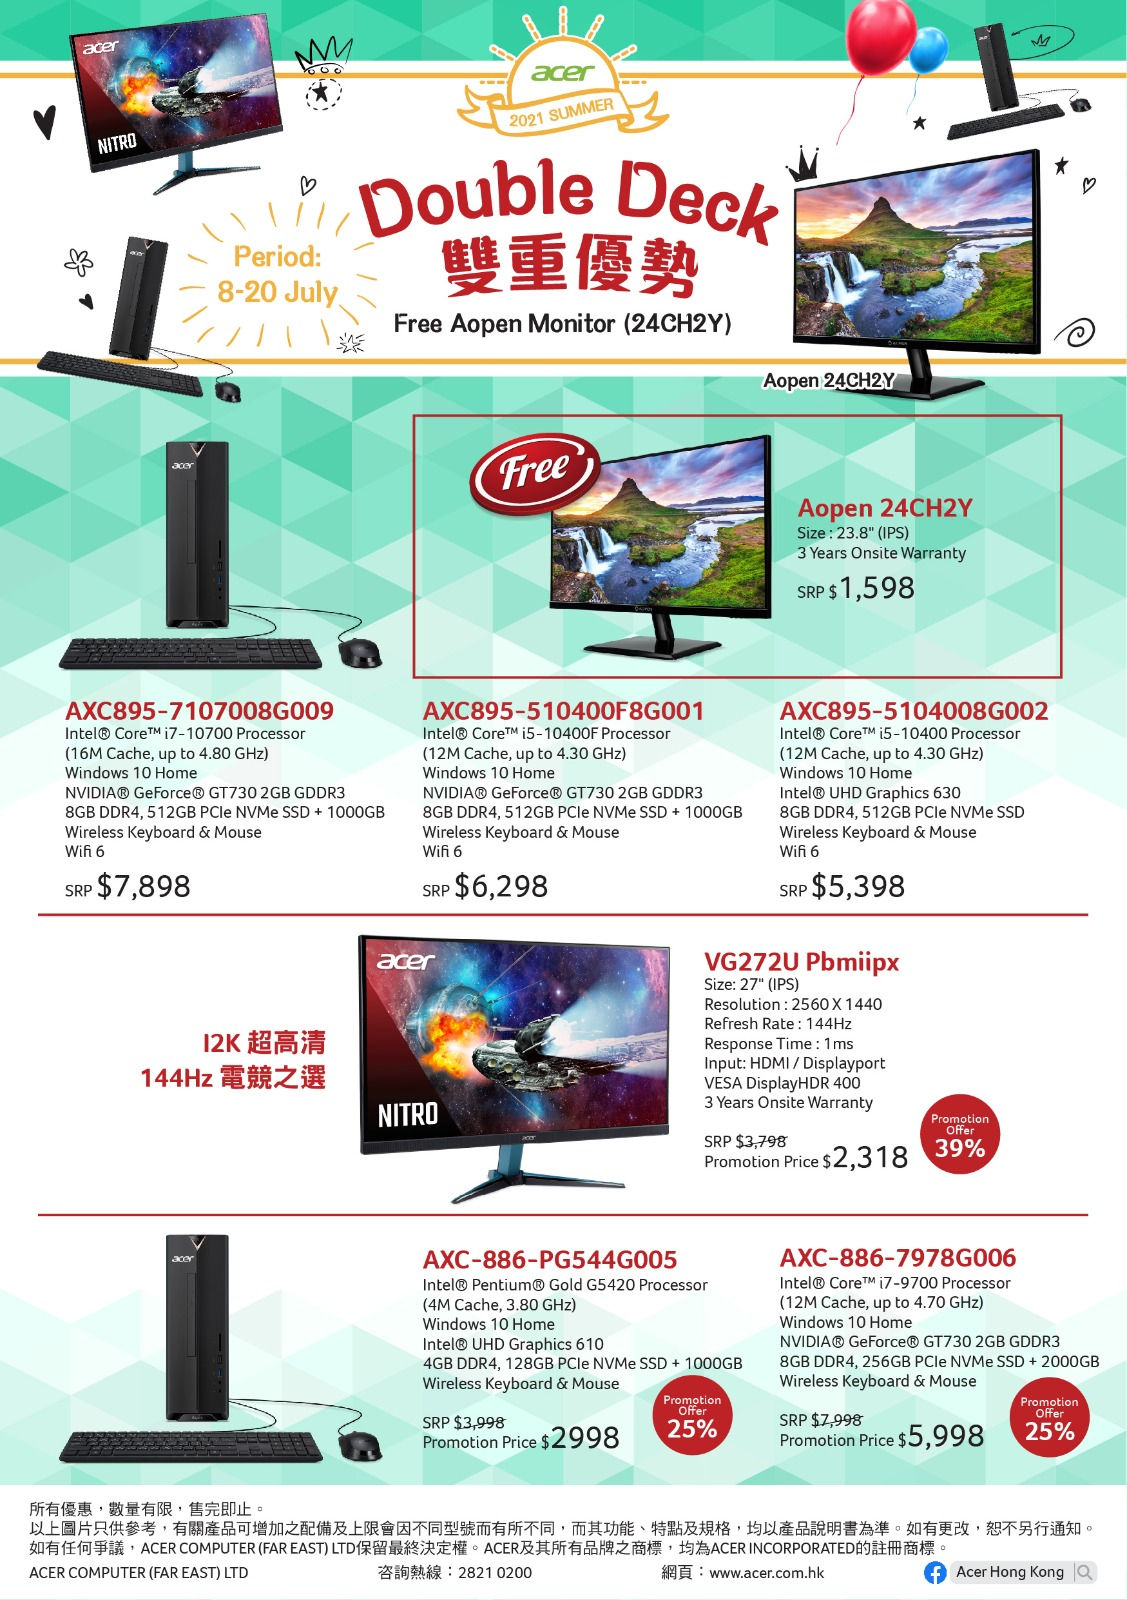 Acer Double Deck Promo